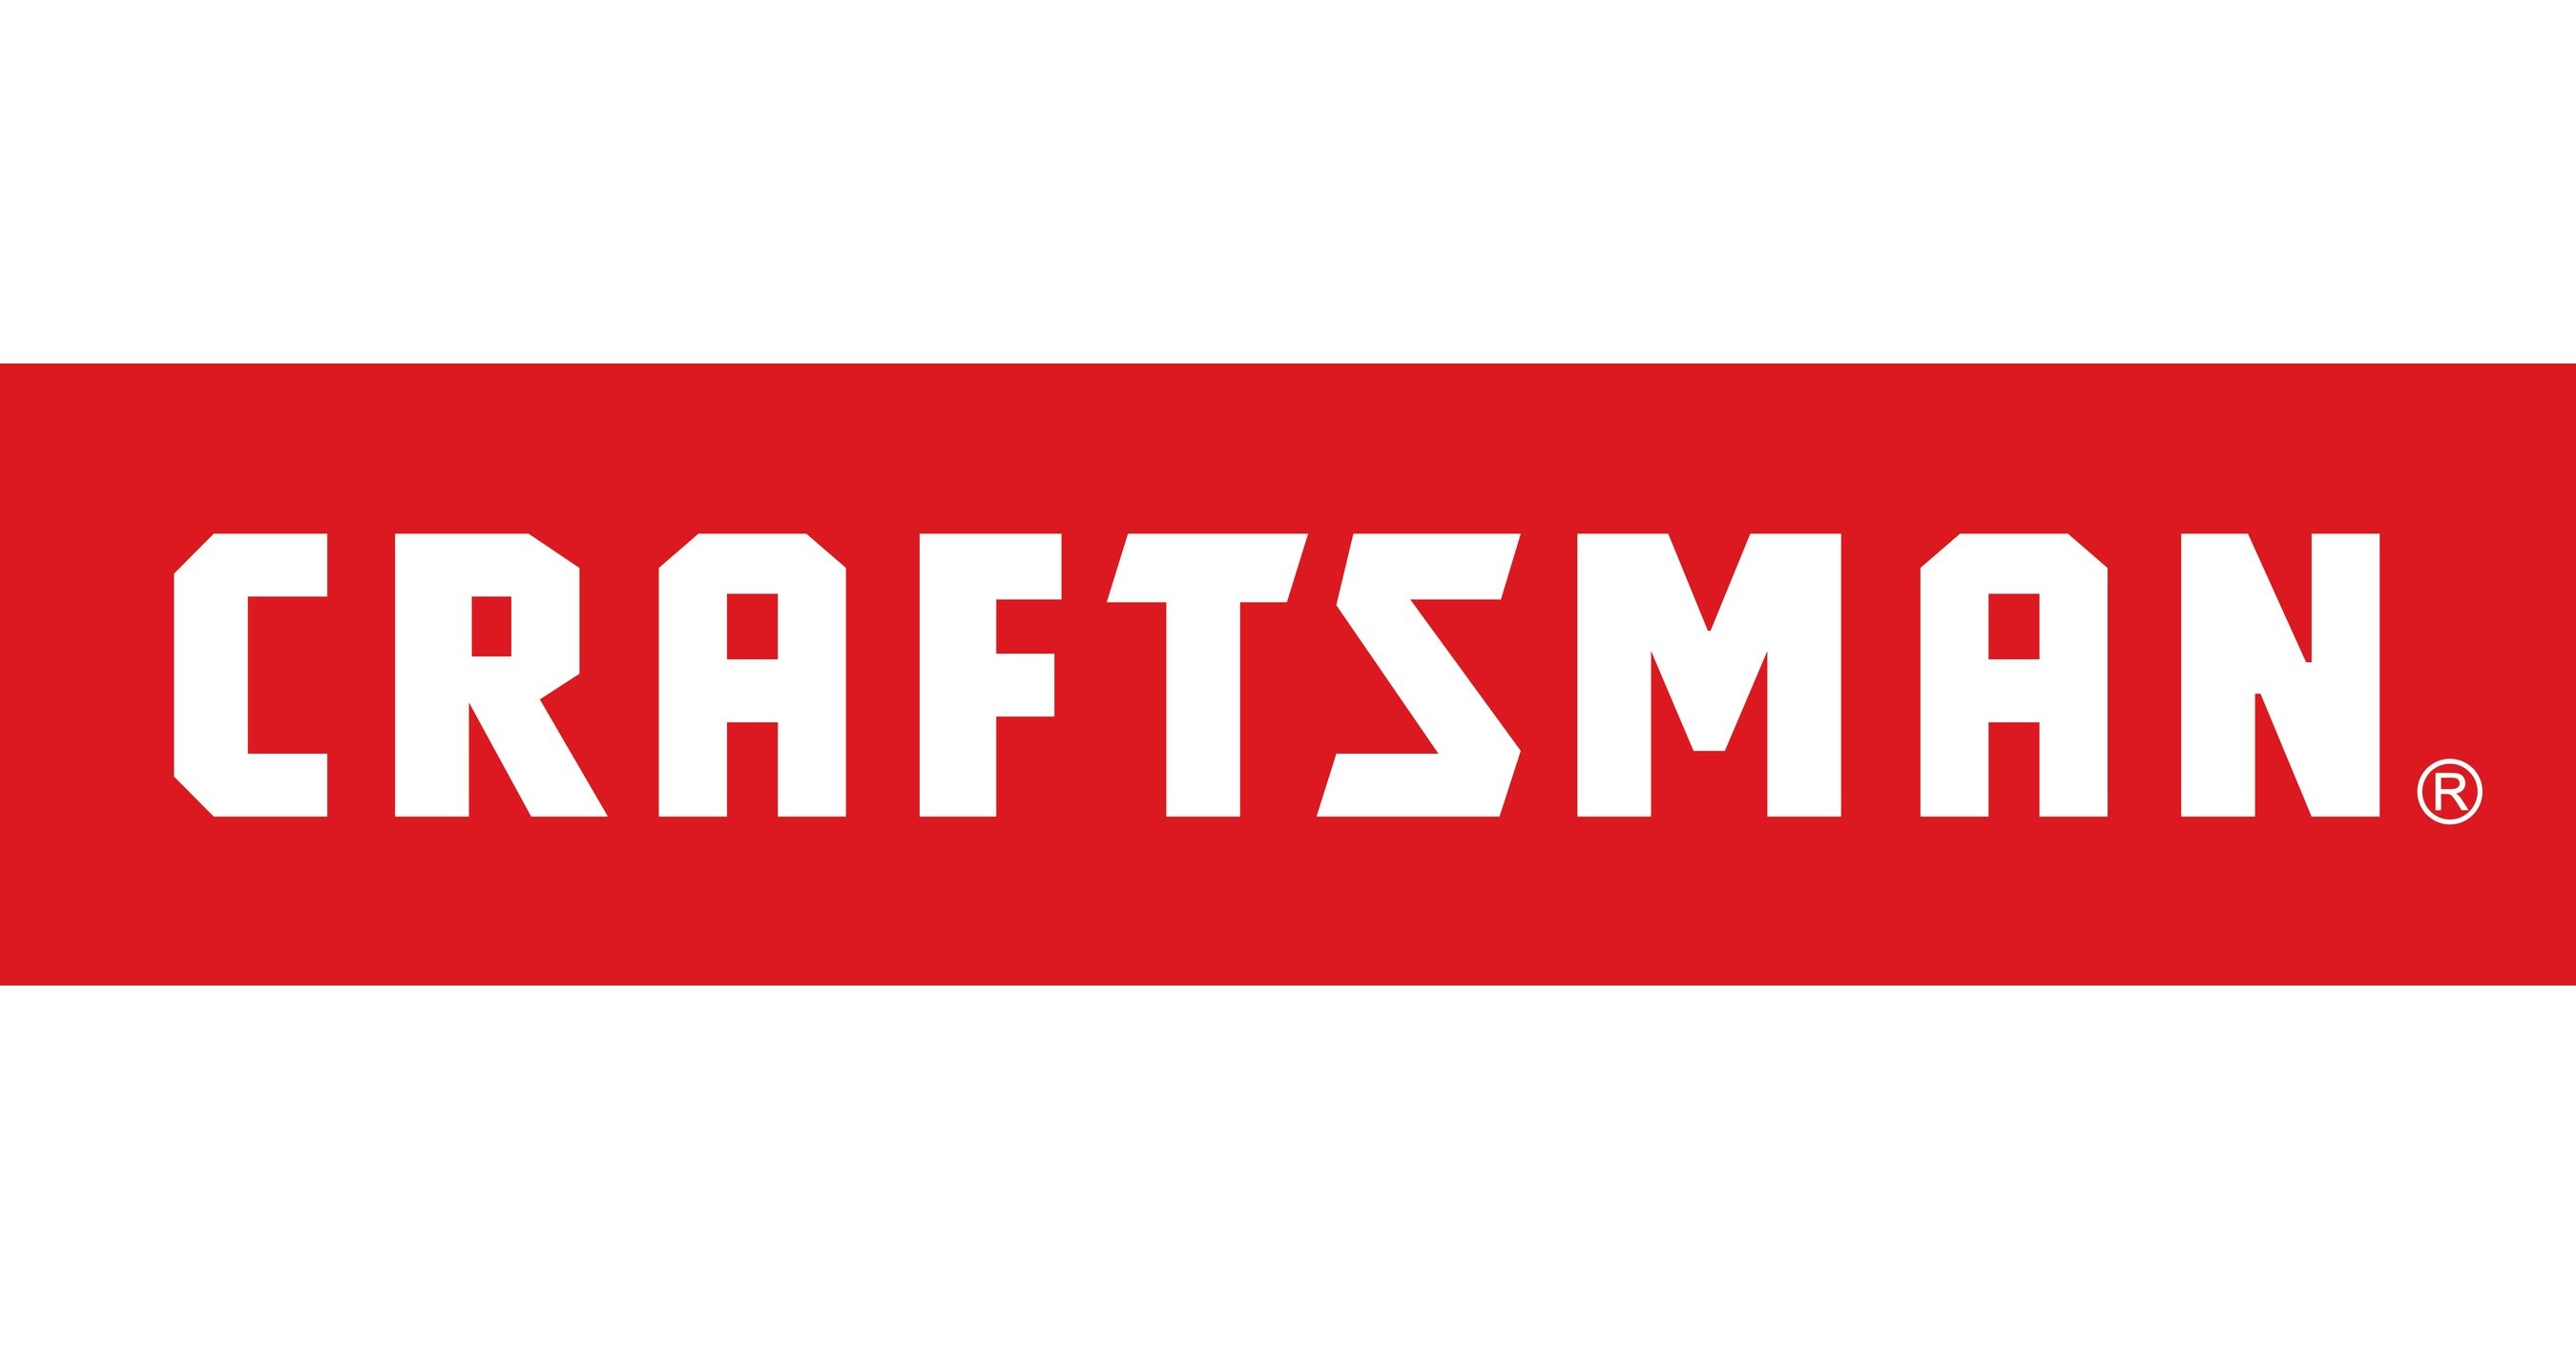 Stanley Black & Decker relaunches Craftsman tool brand in stores